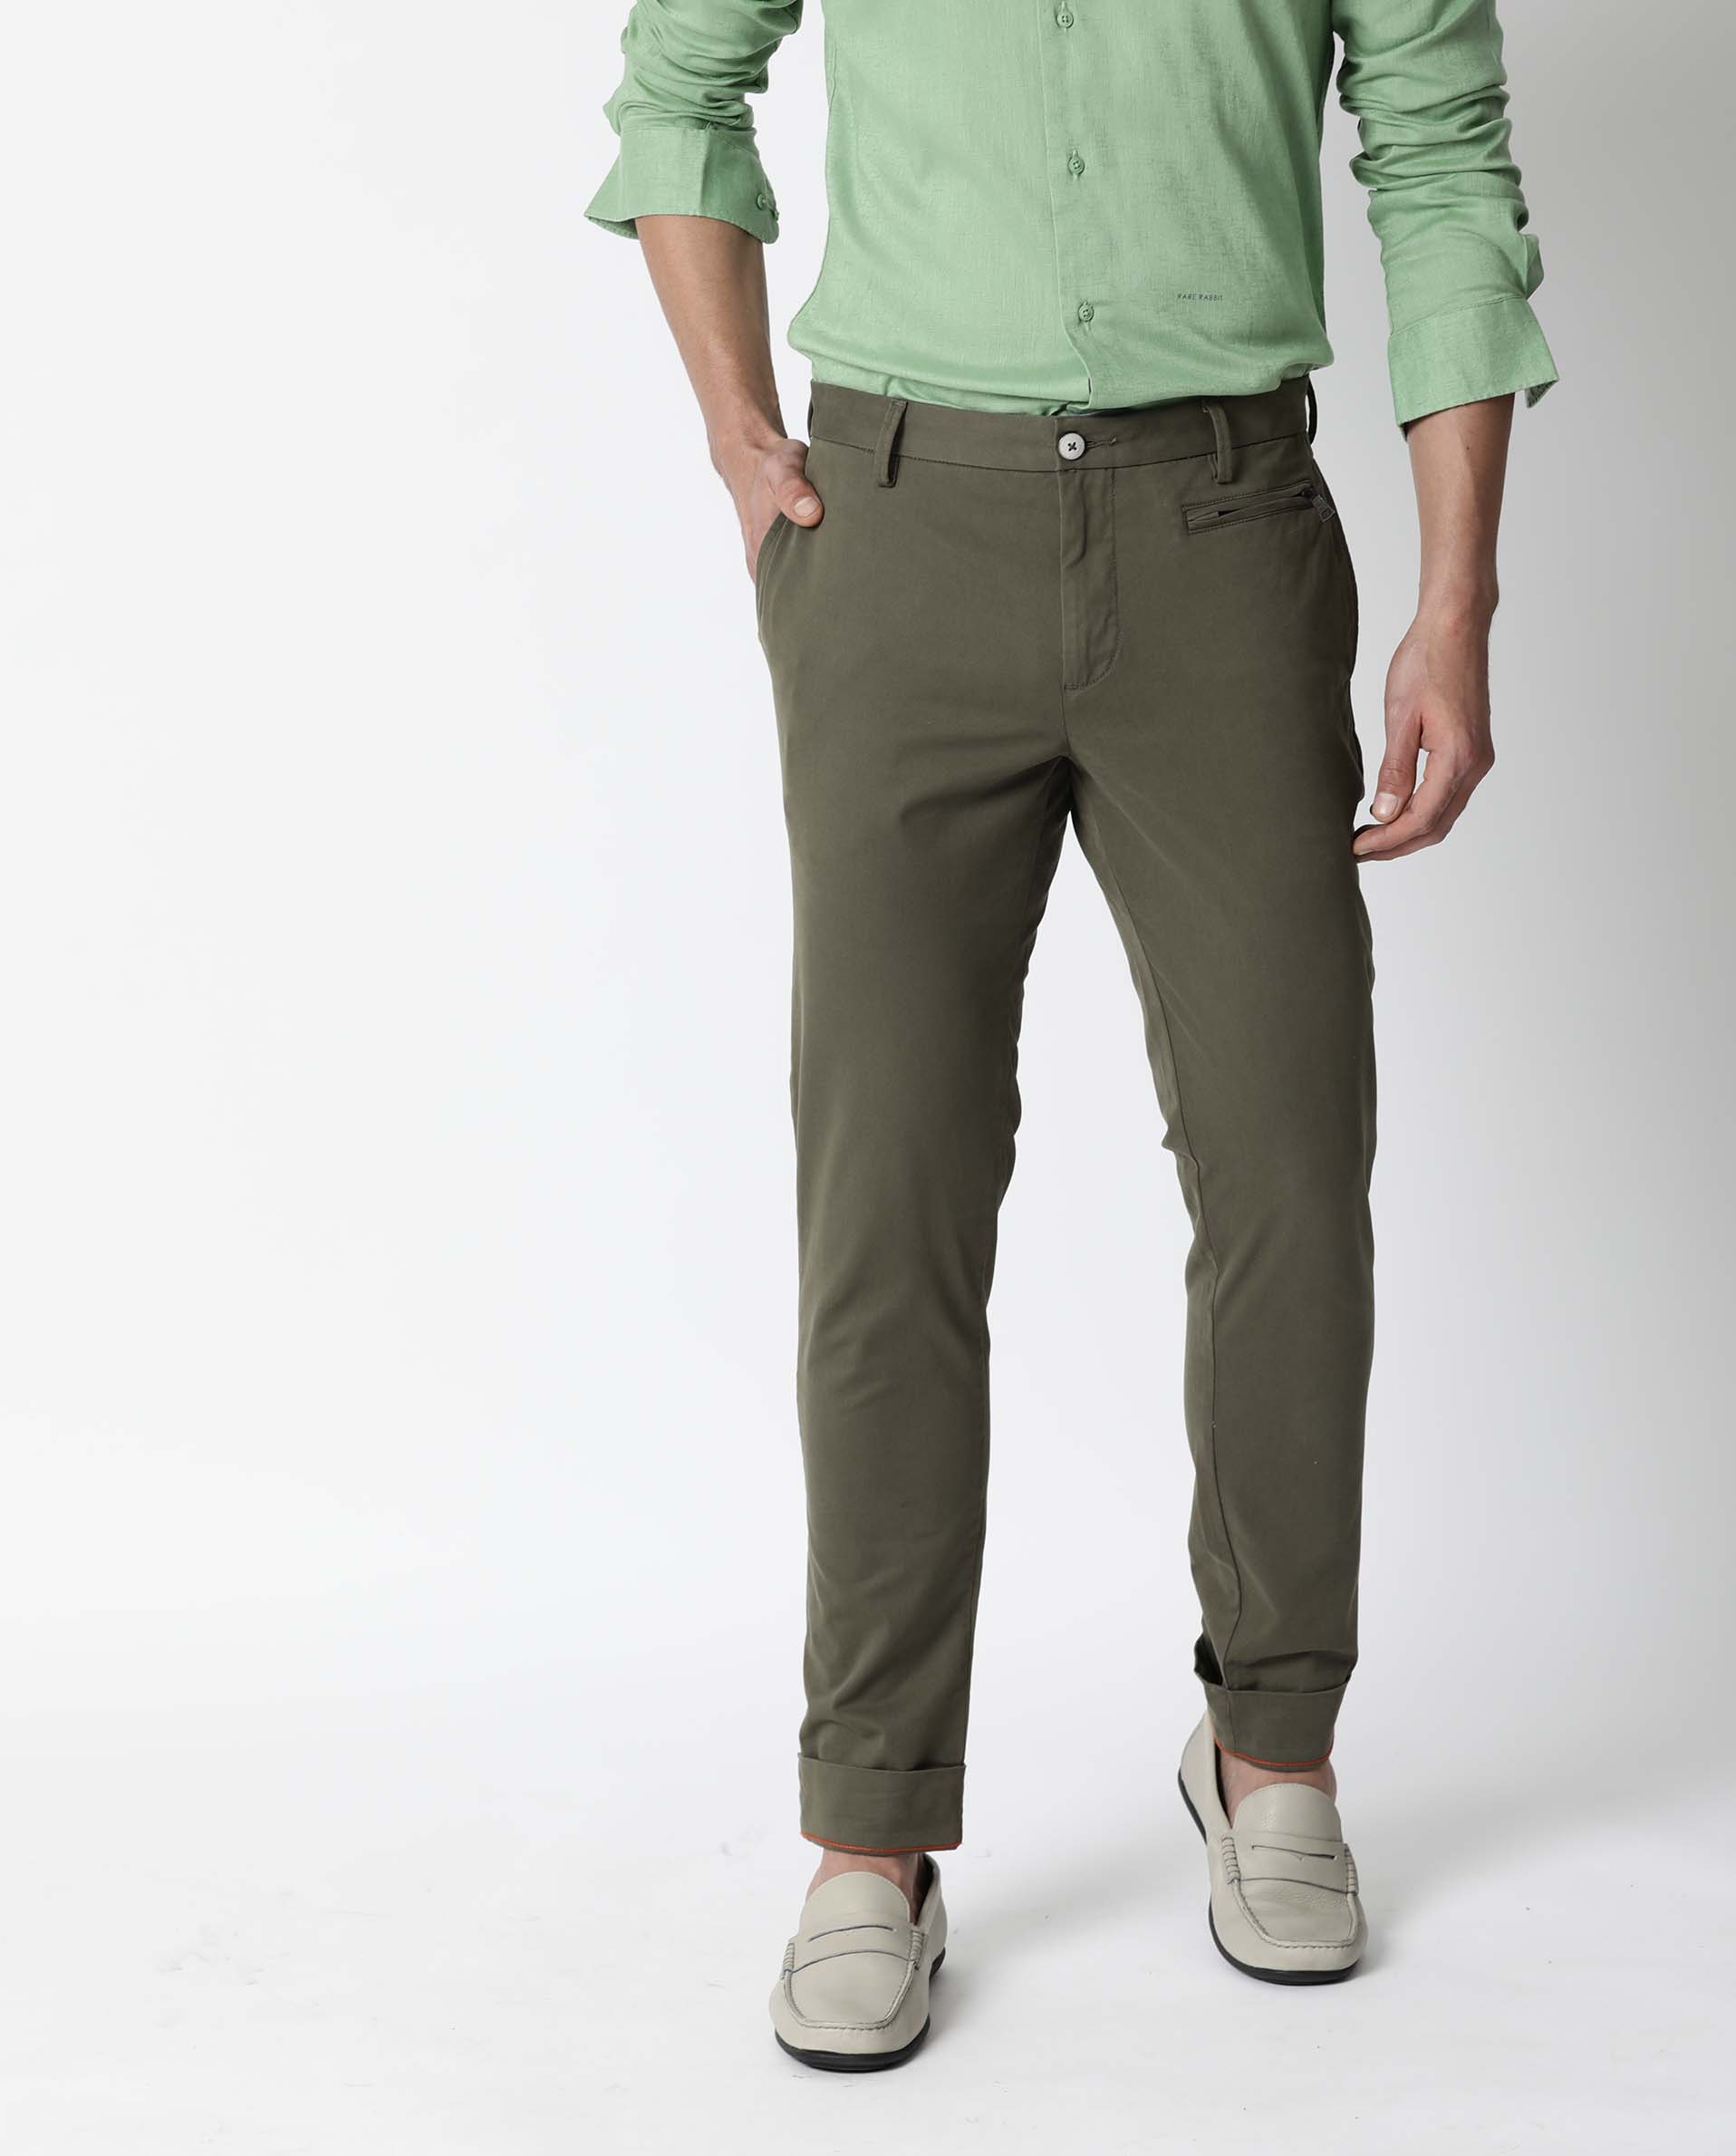 Buy Olive Green Wide-Leg Trousers Online - RK India Store View